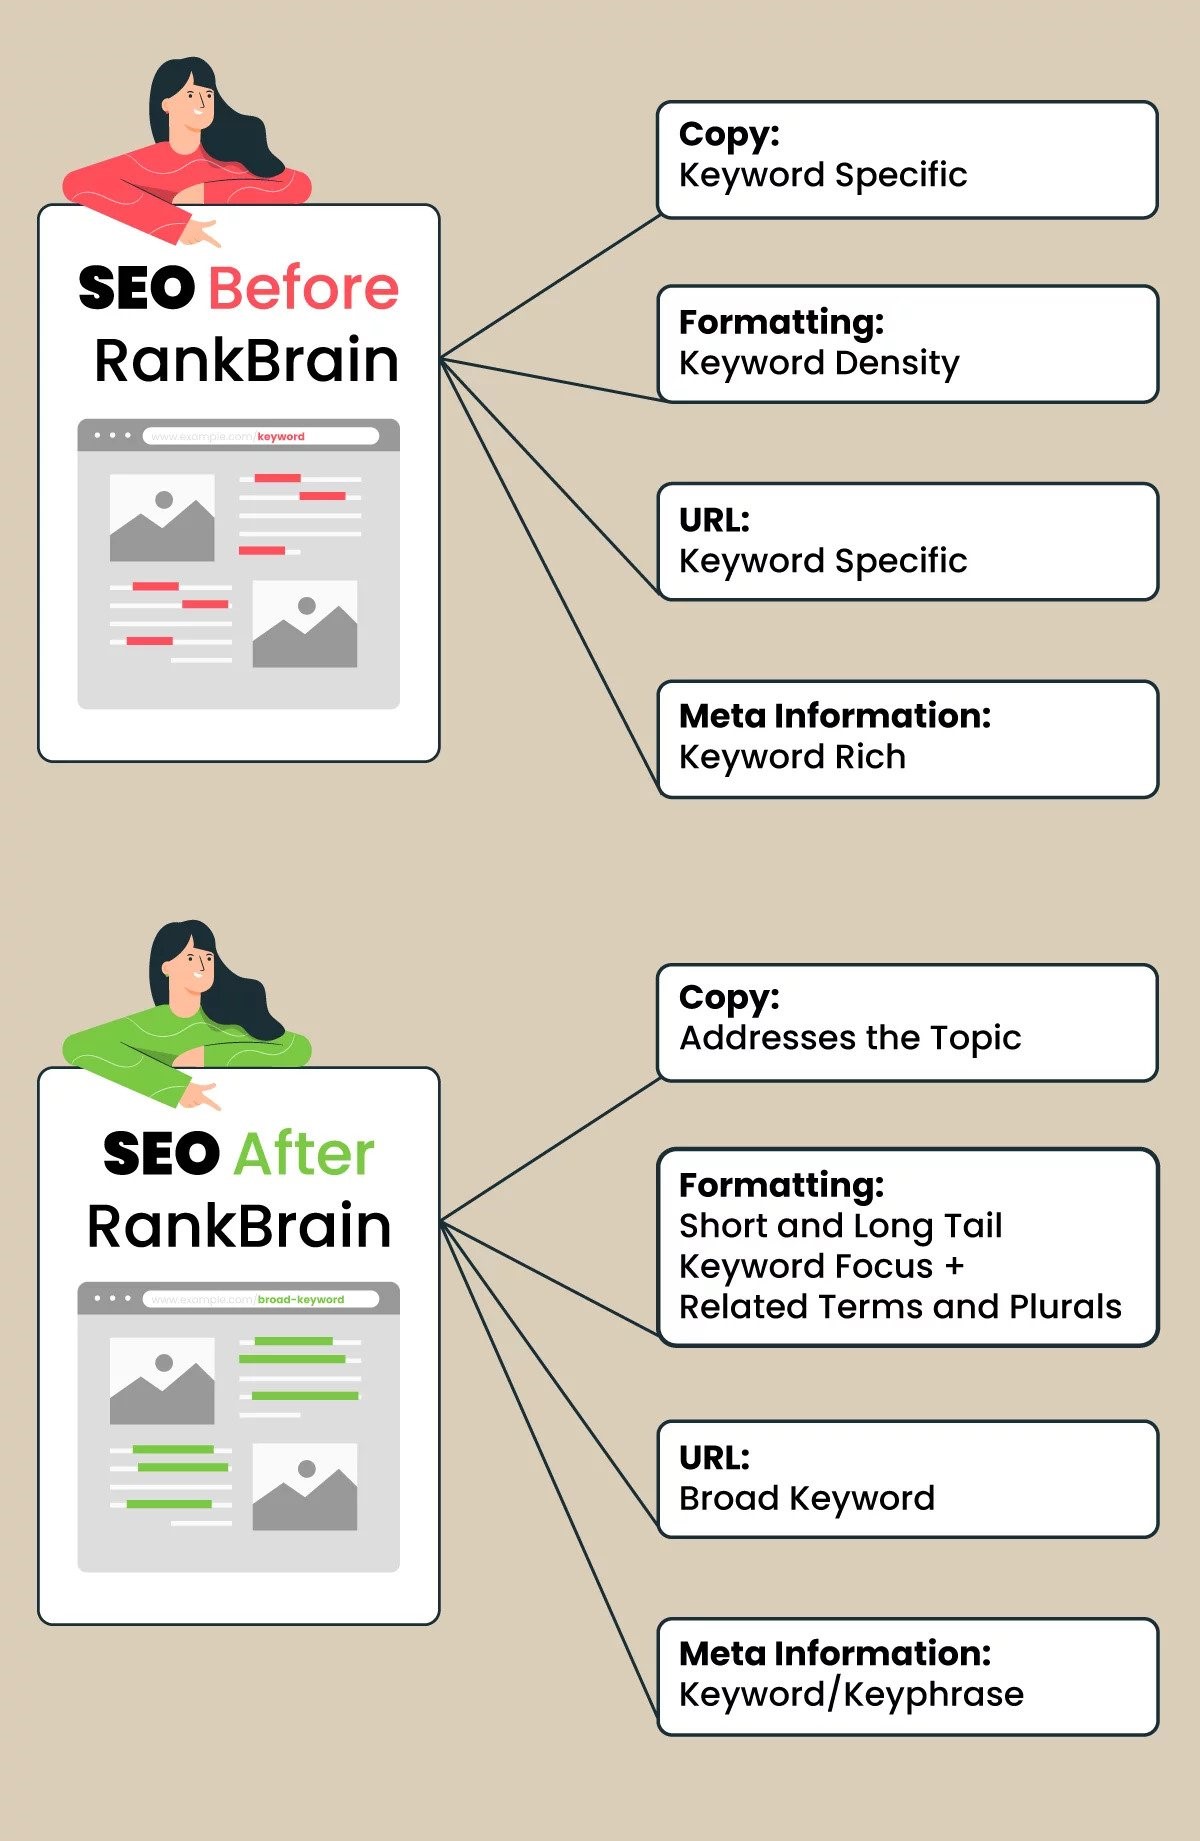 What Does RankBrain Have To Do With SEO